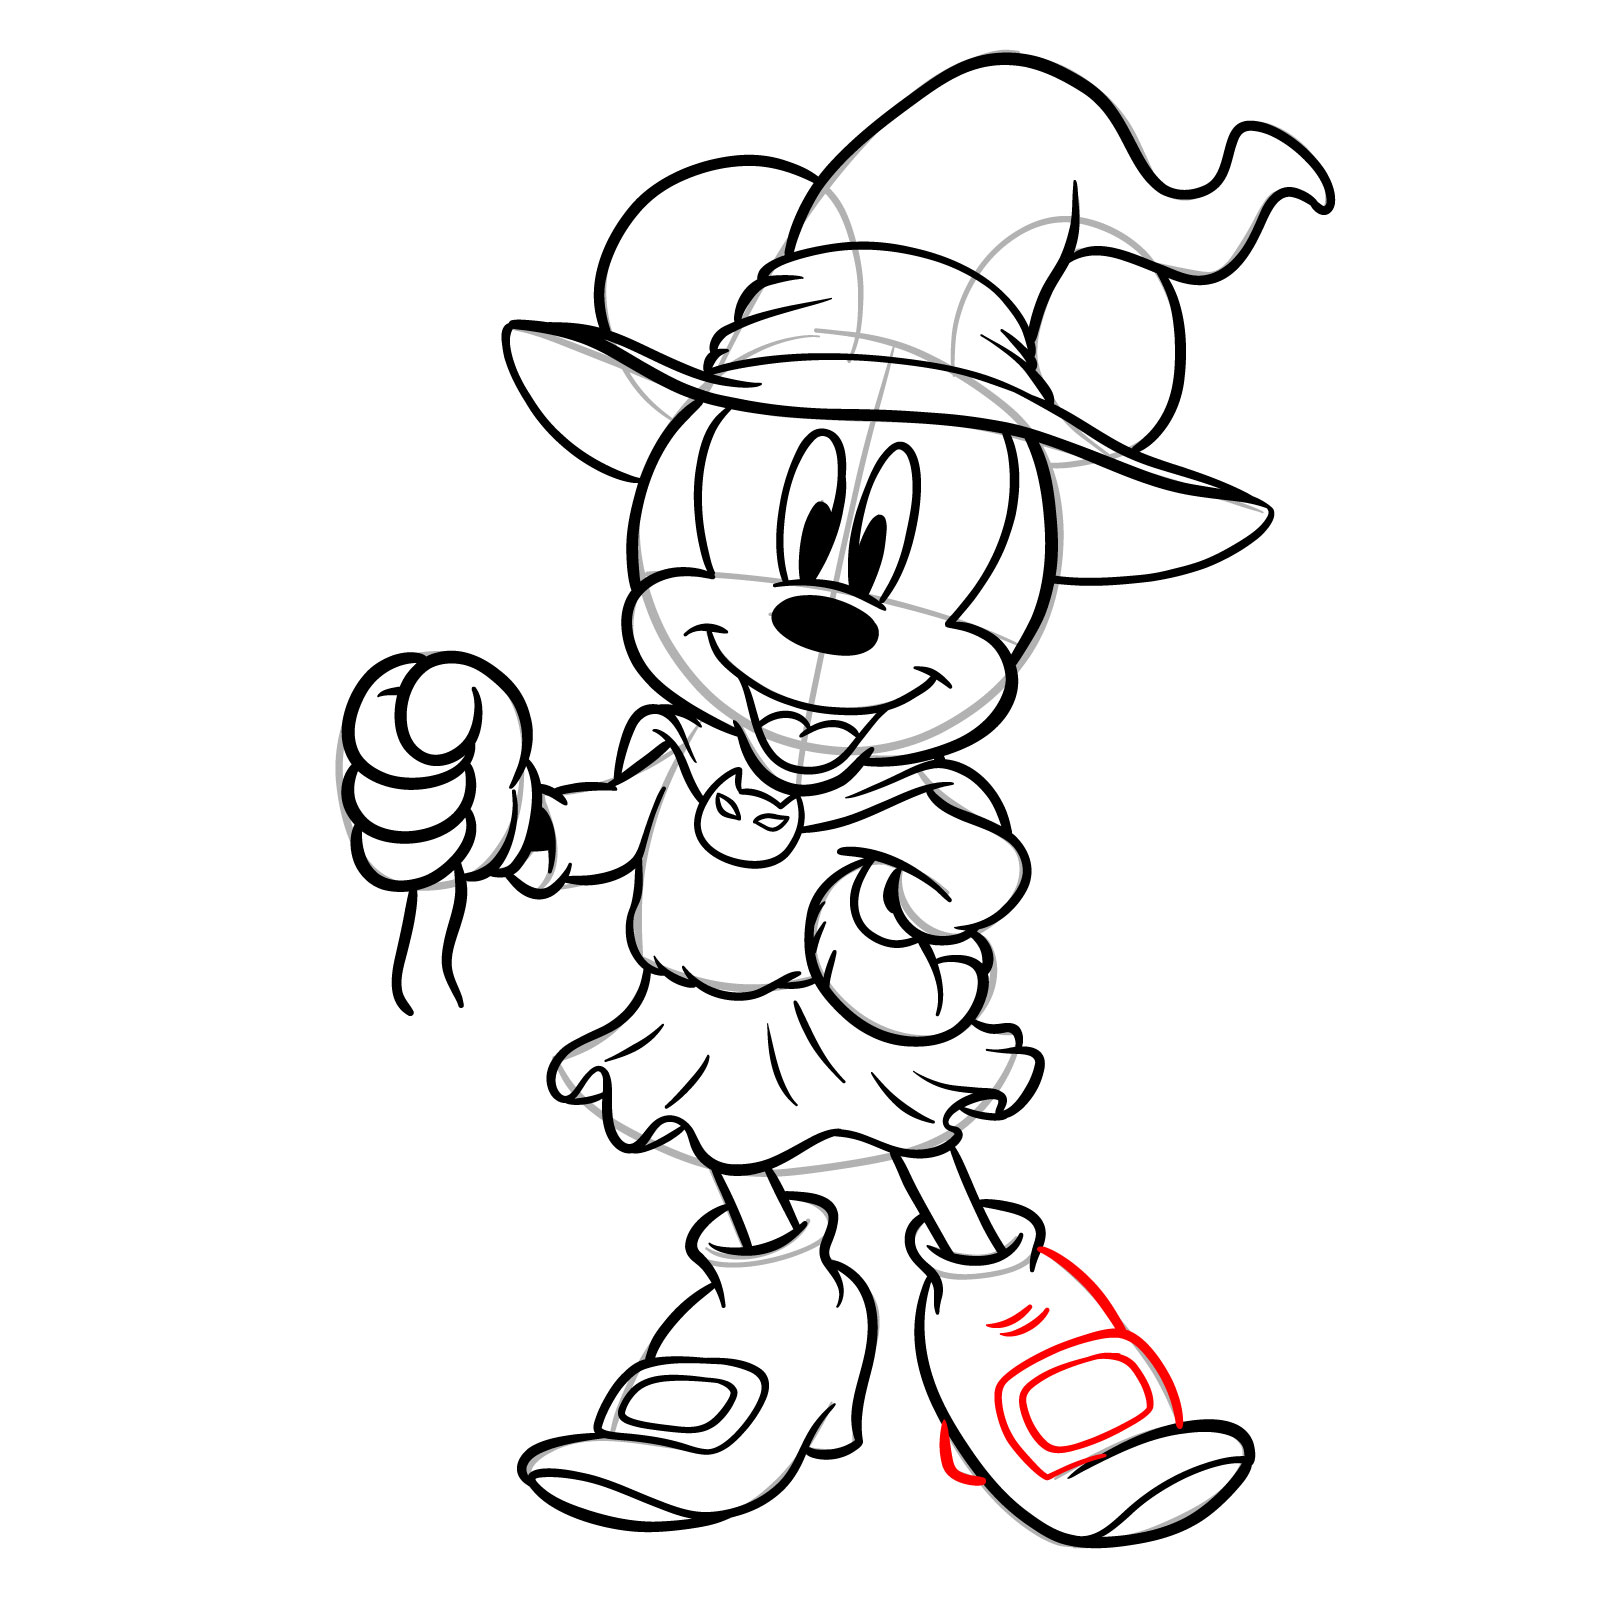 How to draw Halloween Minnie Mouse as a witch - step 30